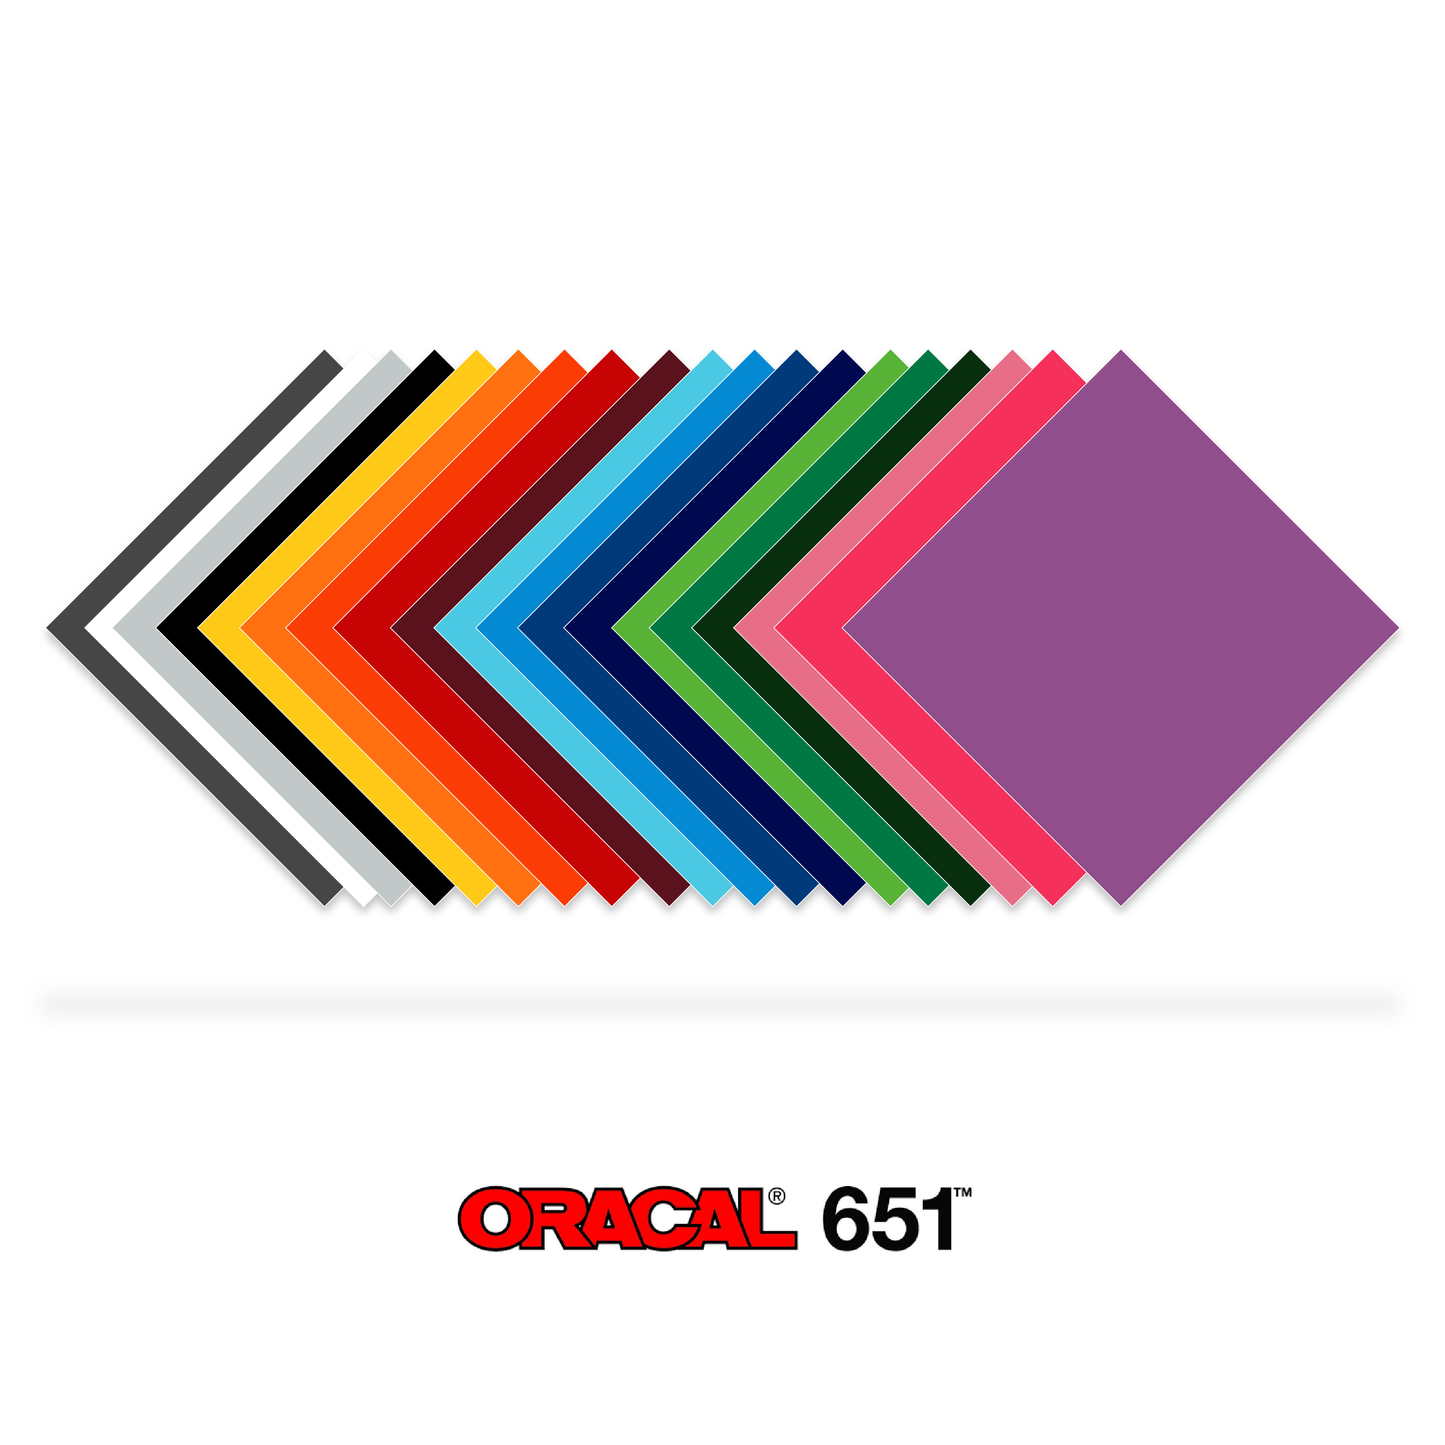 ORACAL® 651 12" X 12" Sheets